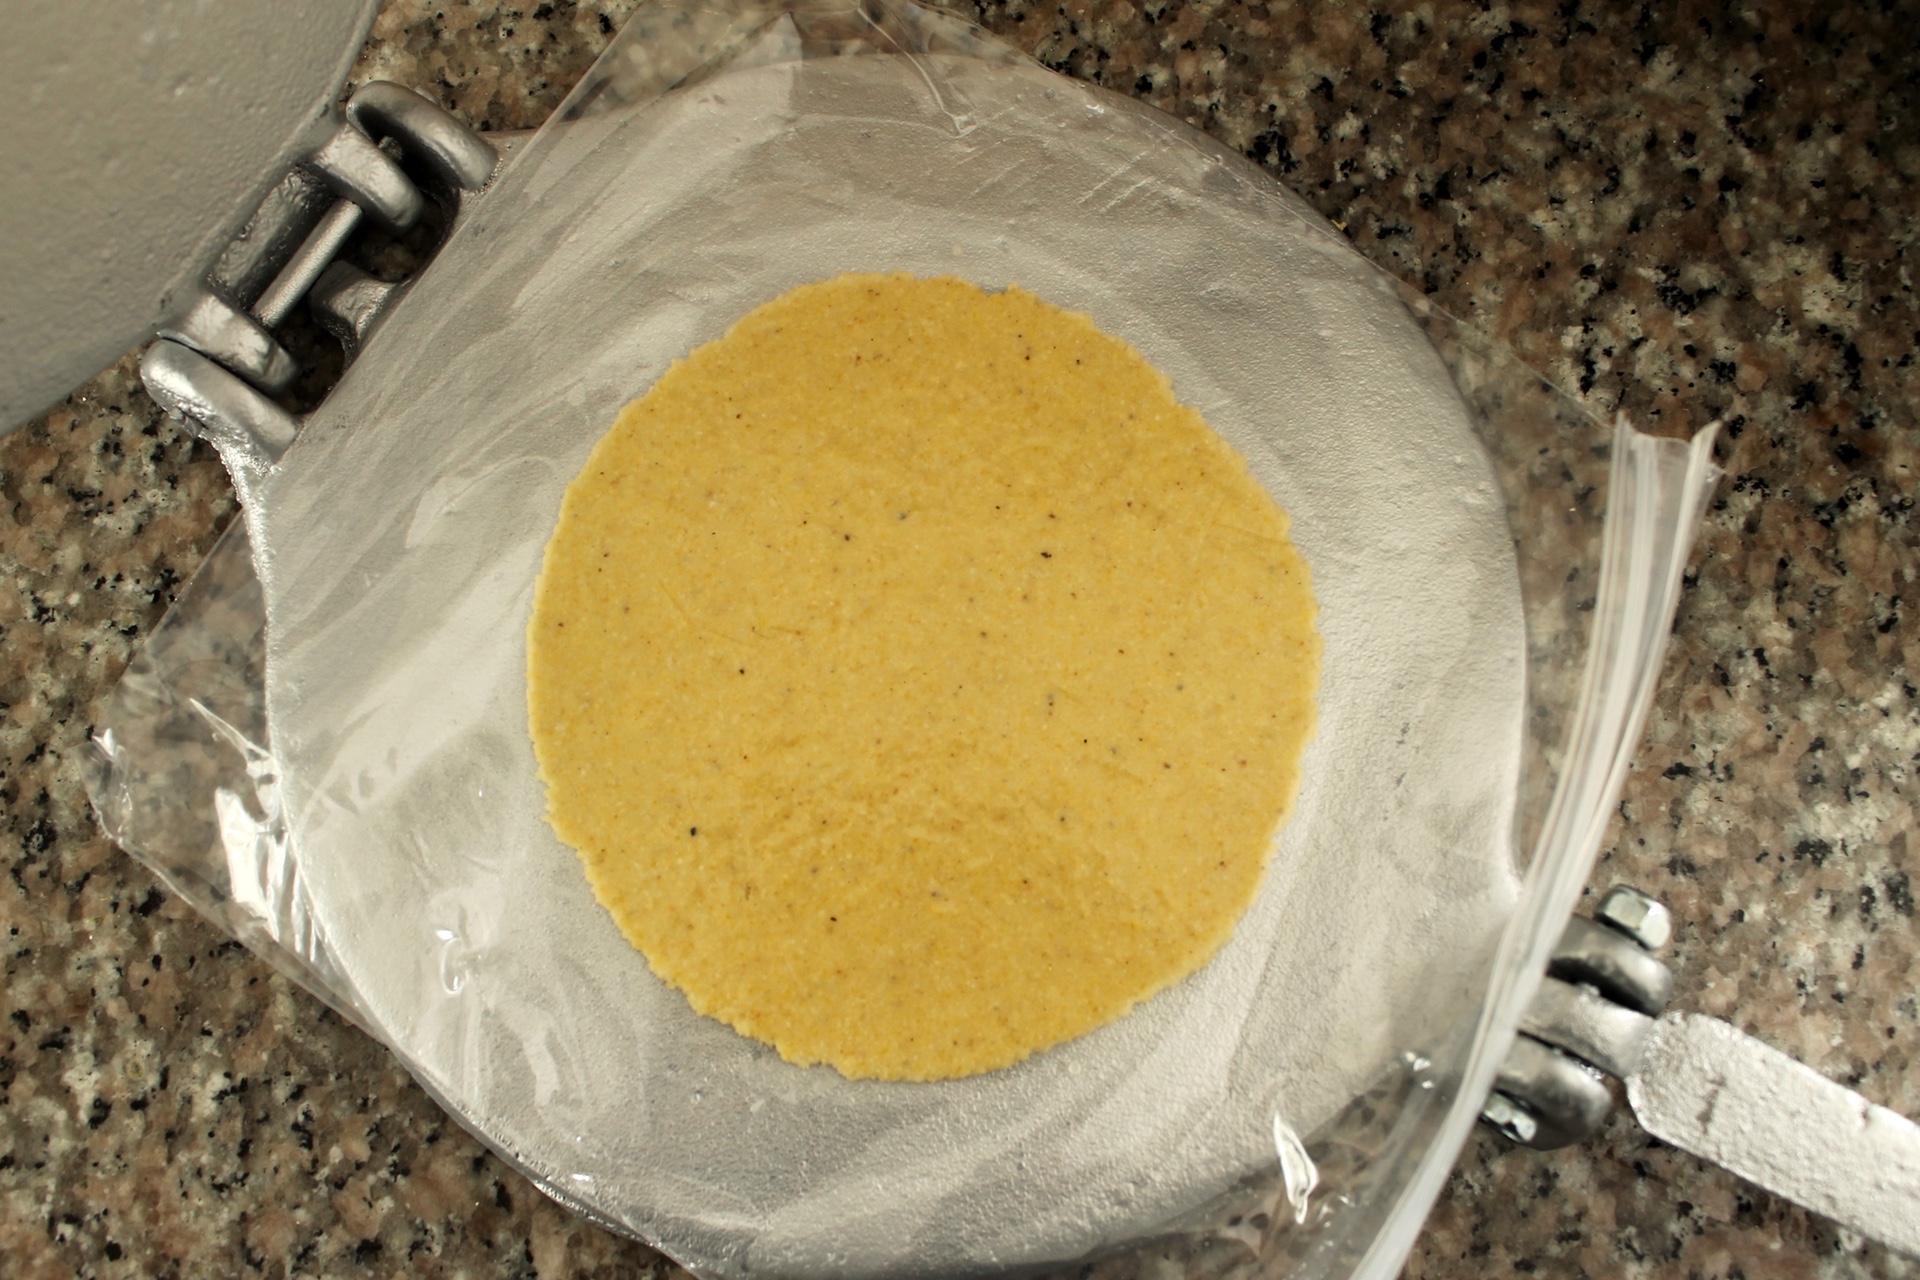 The tortilla should be about 5 inches across with an even ⅛-inch thickness.